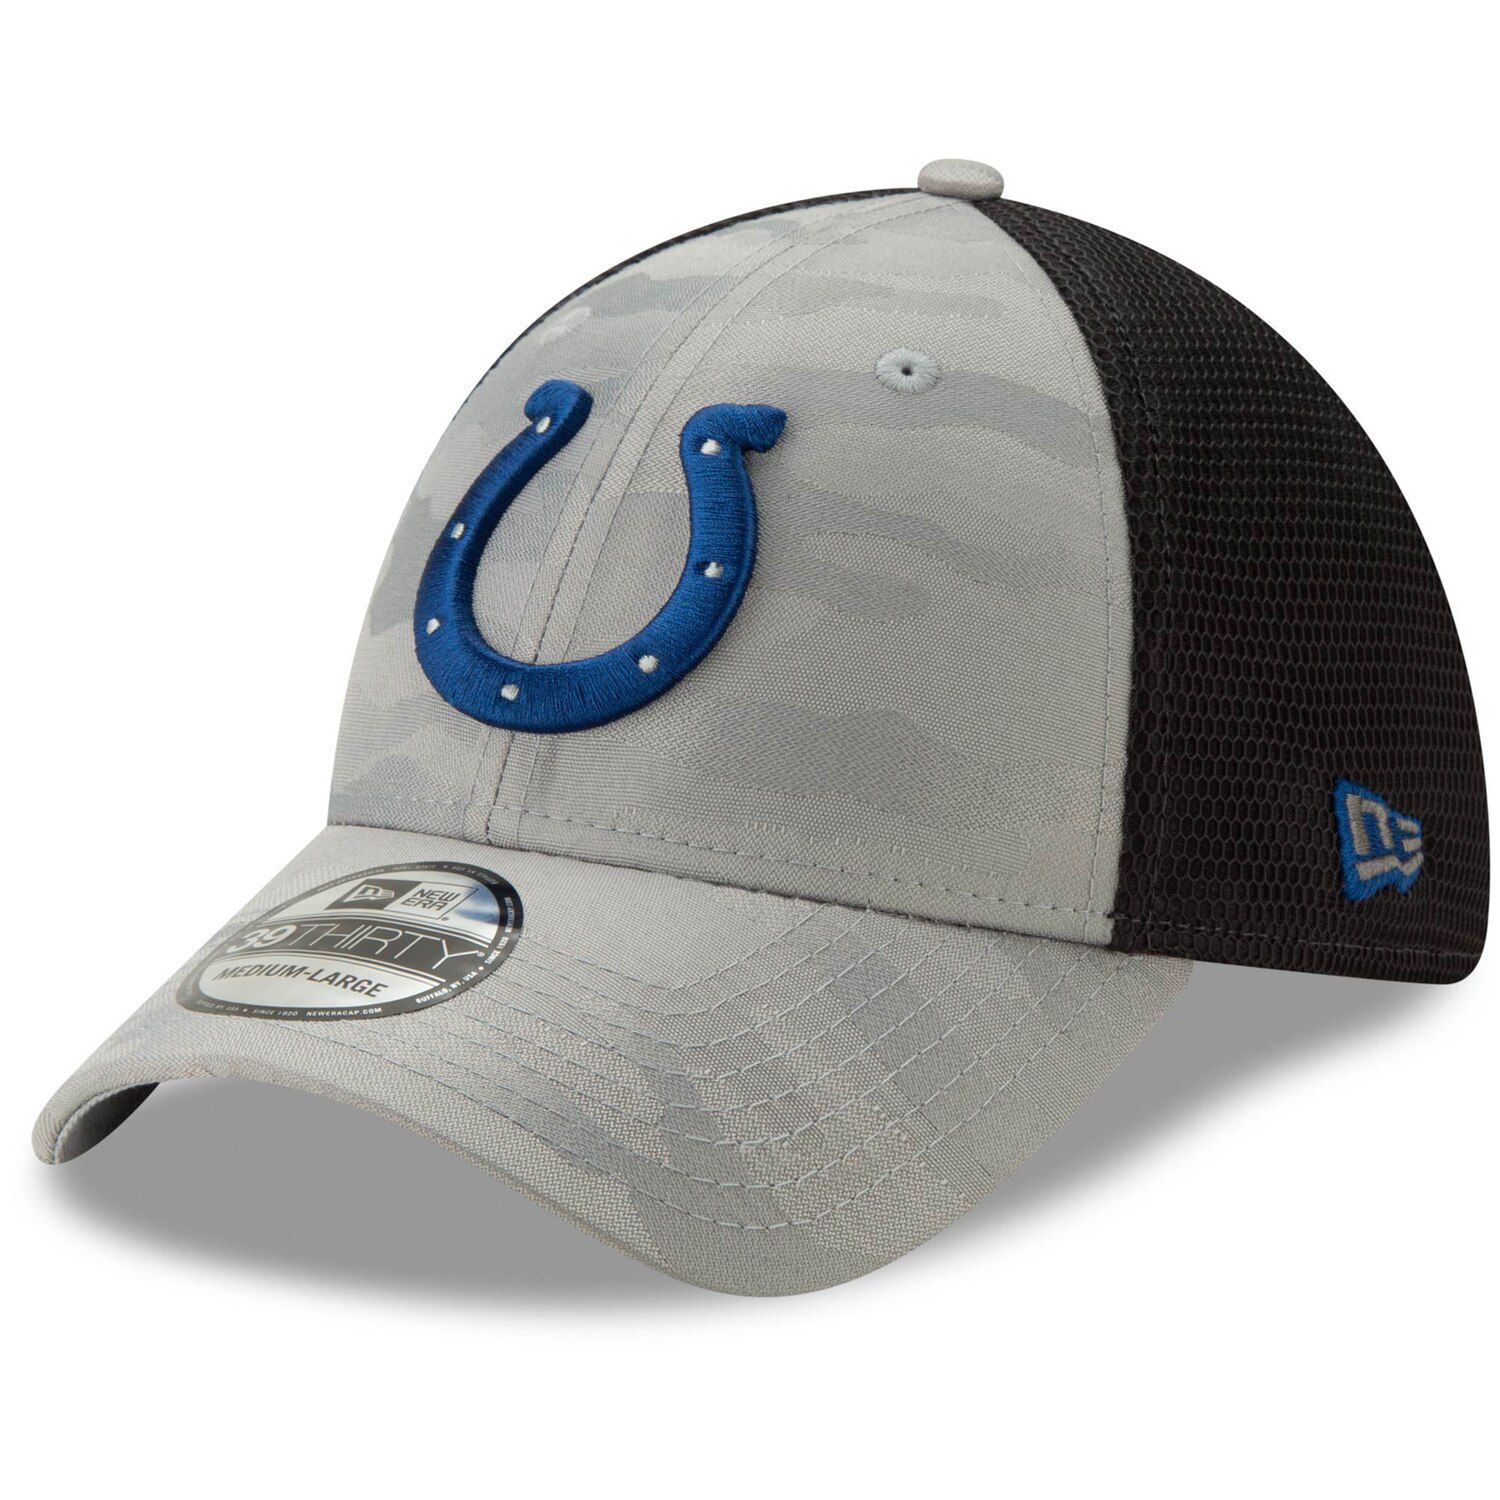 indianapolis colts camo hat